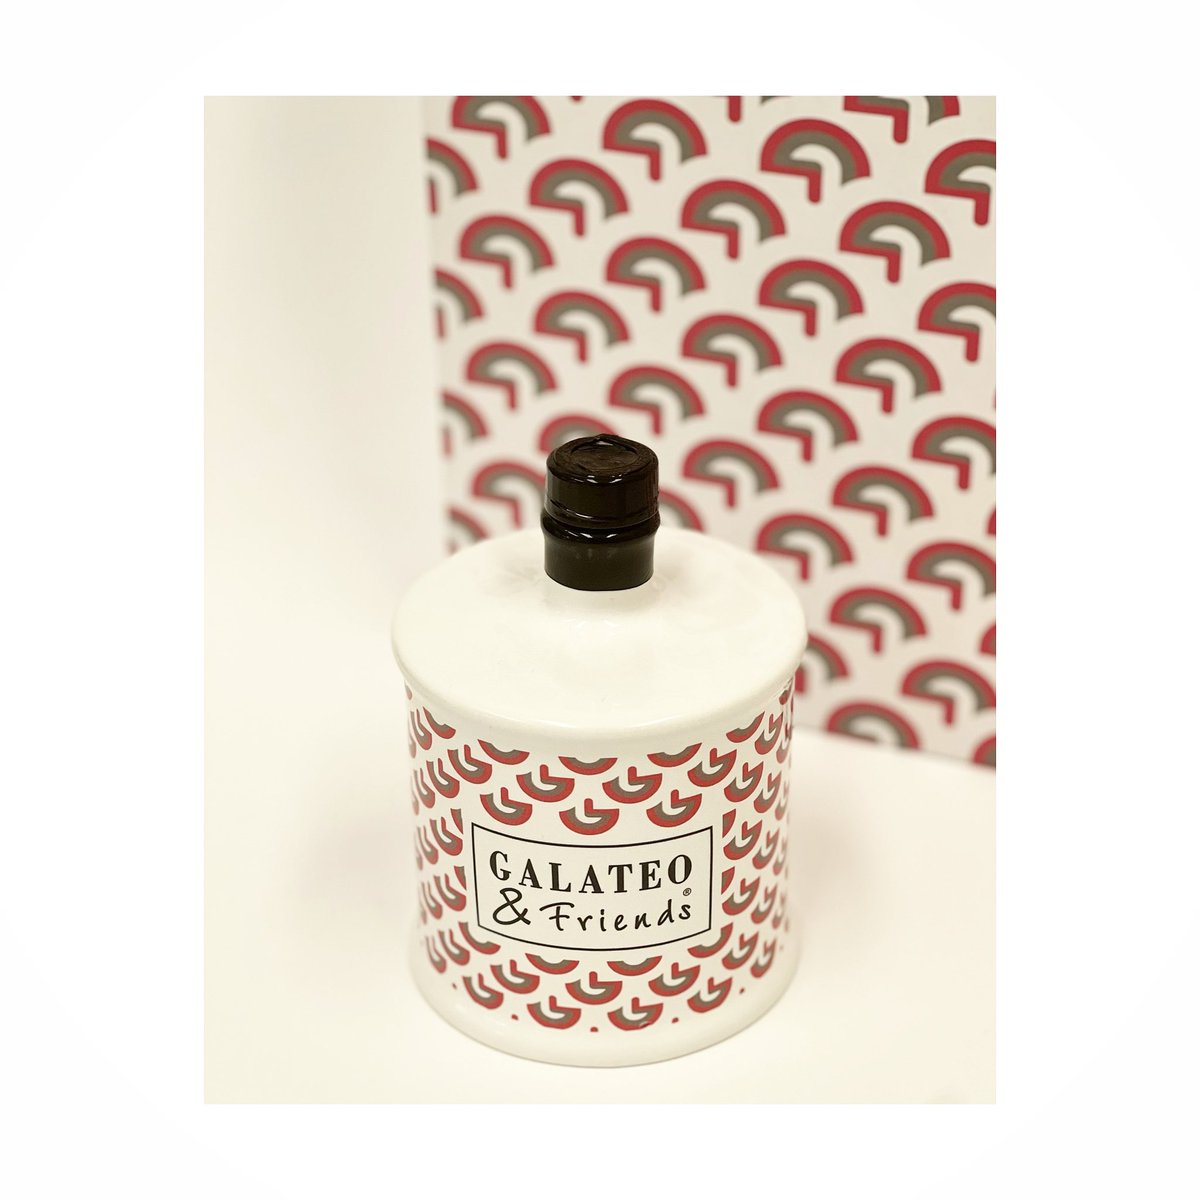 Our new ceramic extra virgin olive oil bottle has arrived @galateofriends ❤️ handcrafted made in Italy #availablesoon #galateoandfriends #galateoatavola #ceramica #fattoamano #extravirginoliveoil #newentry🔝